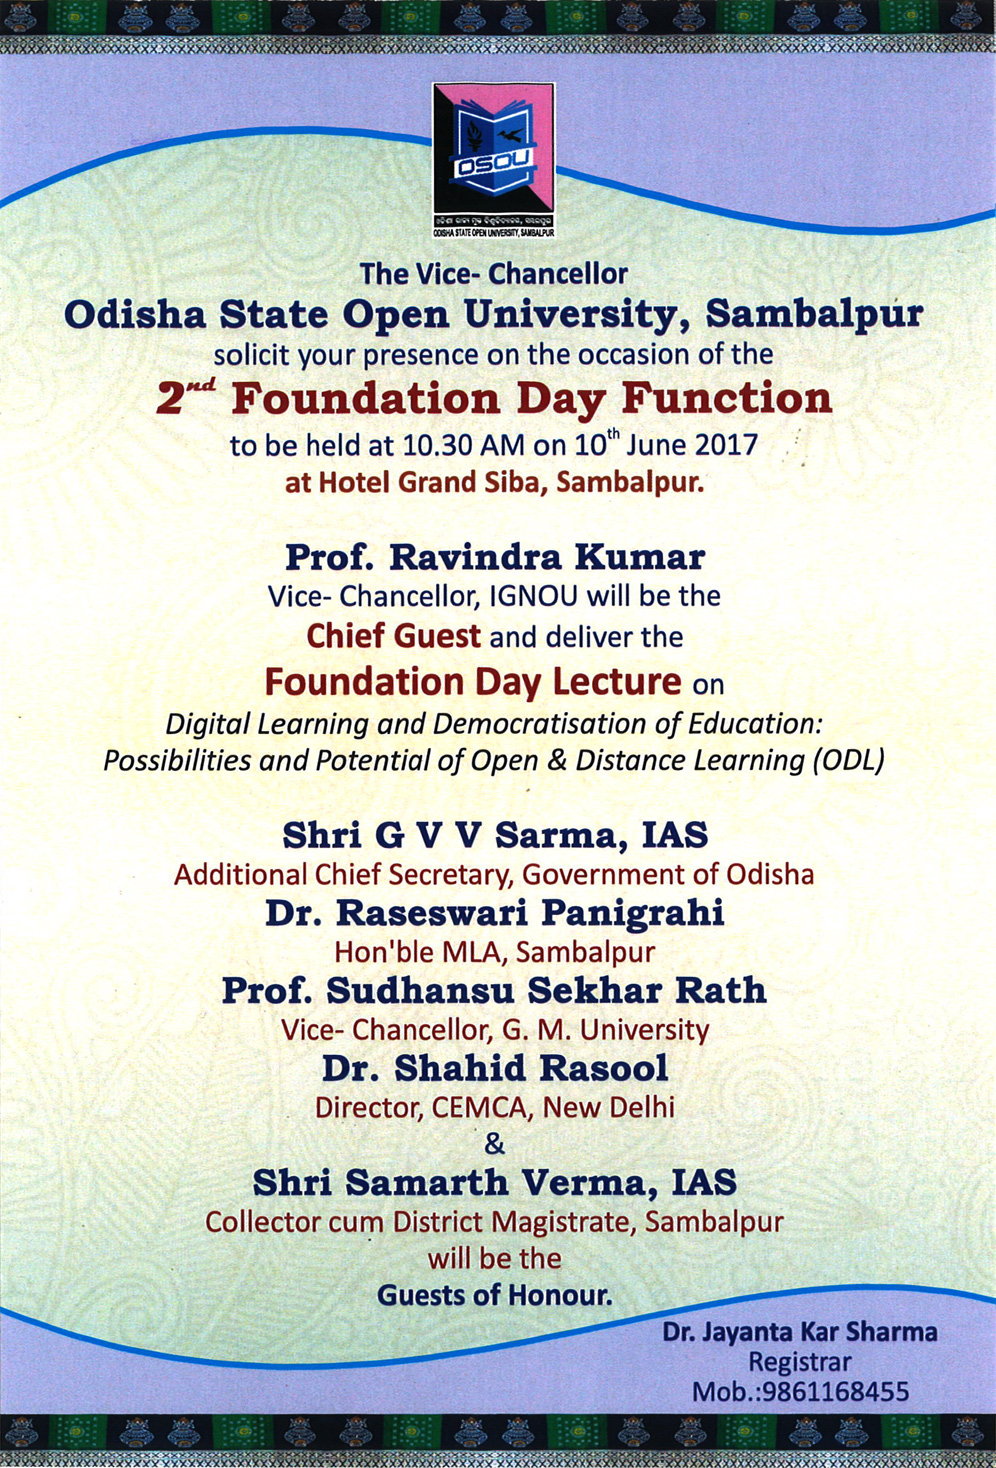 Invitation Card of 2nd Foundation Day Function of OSOU